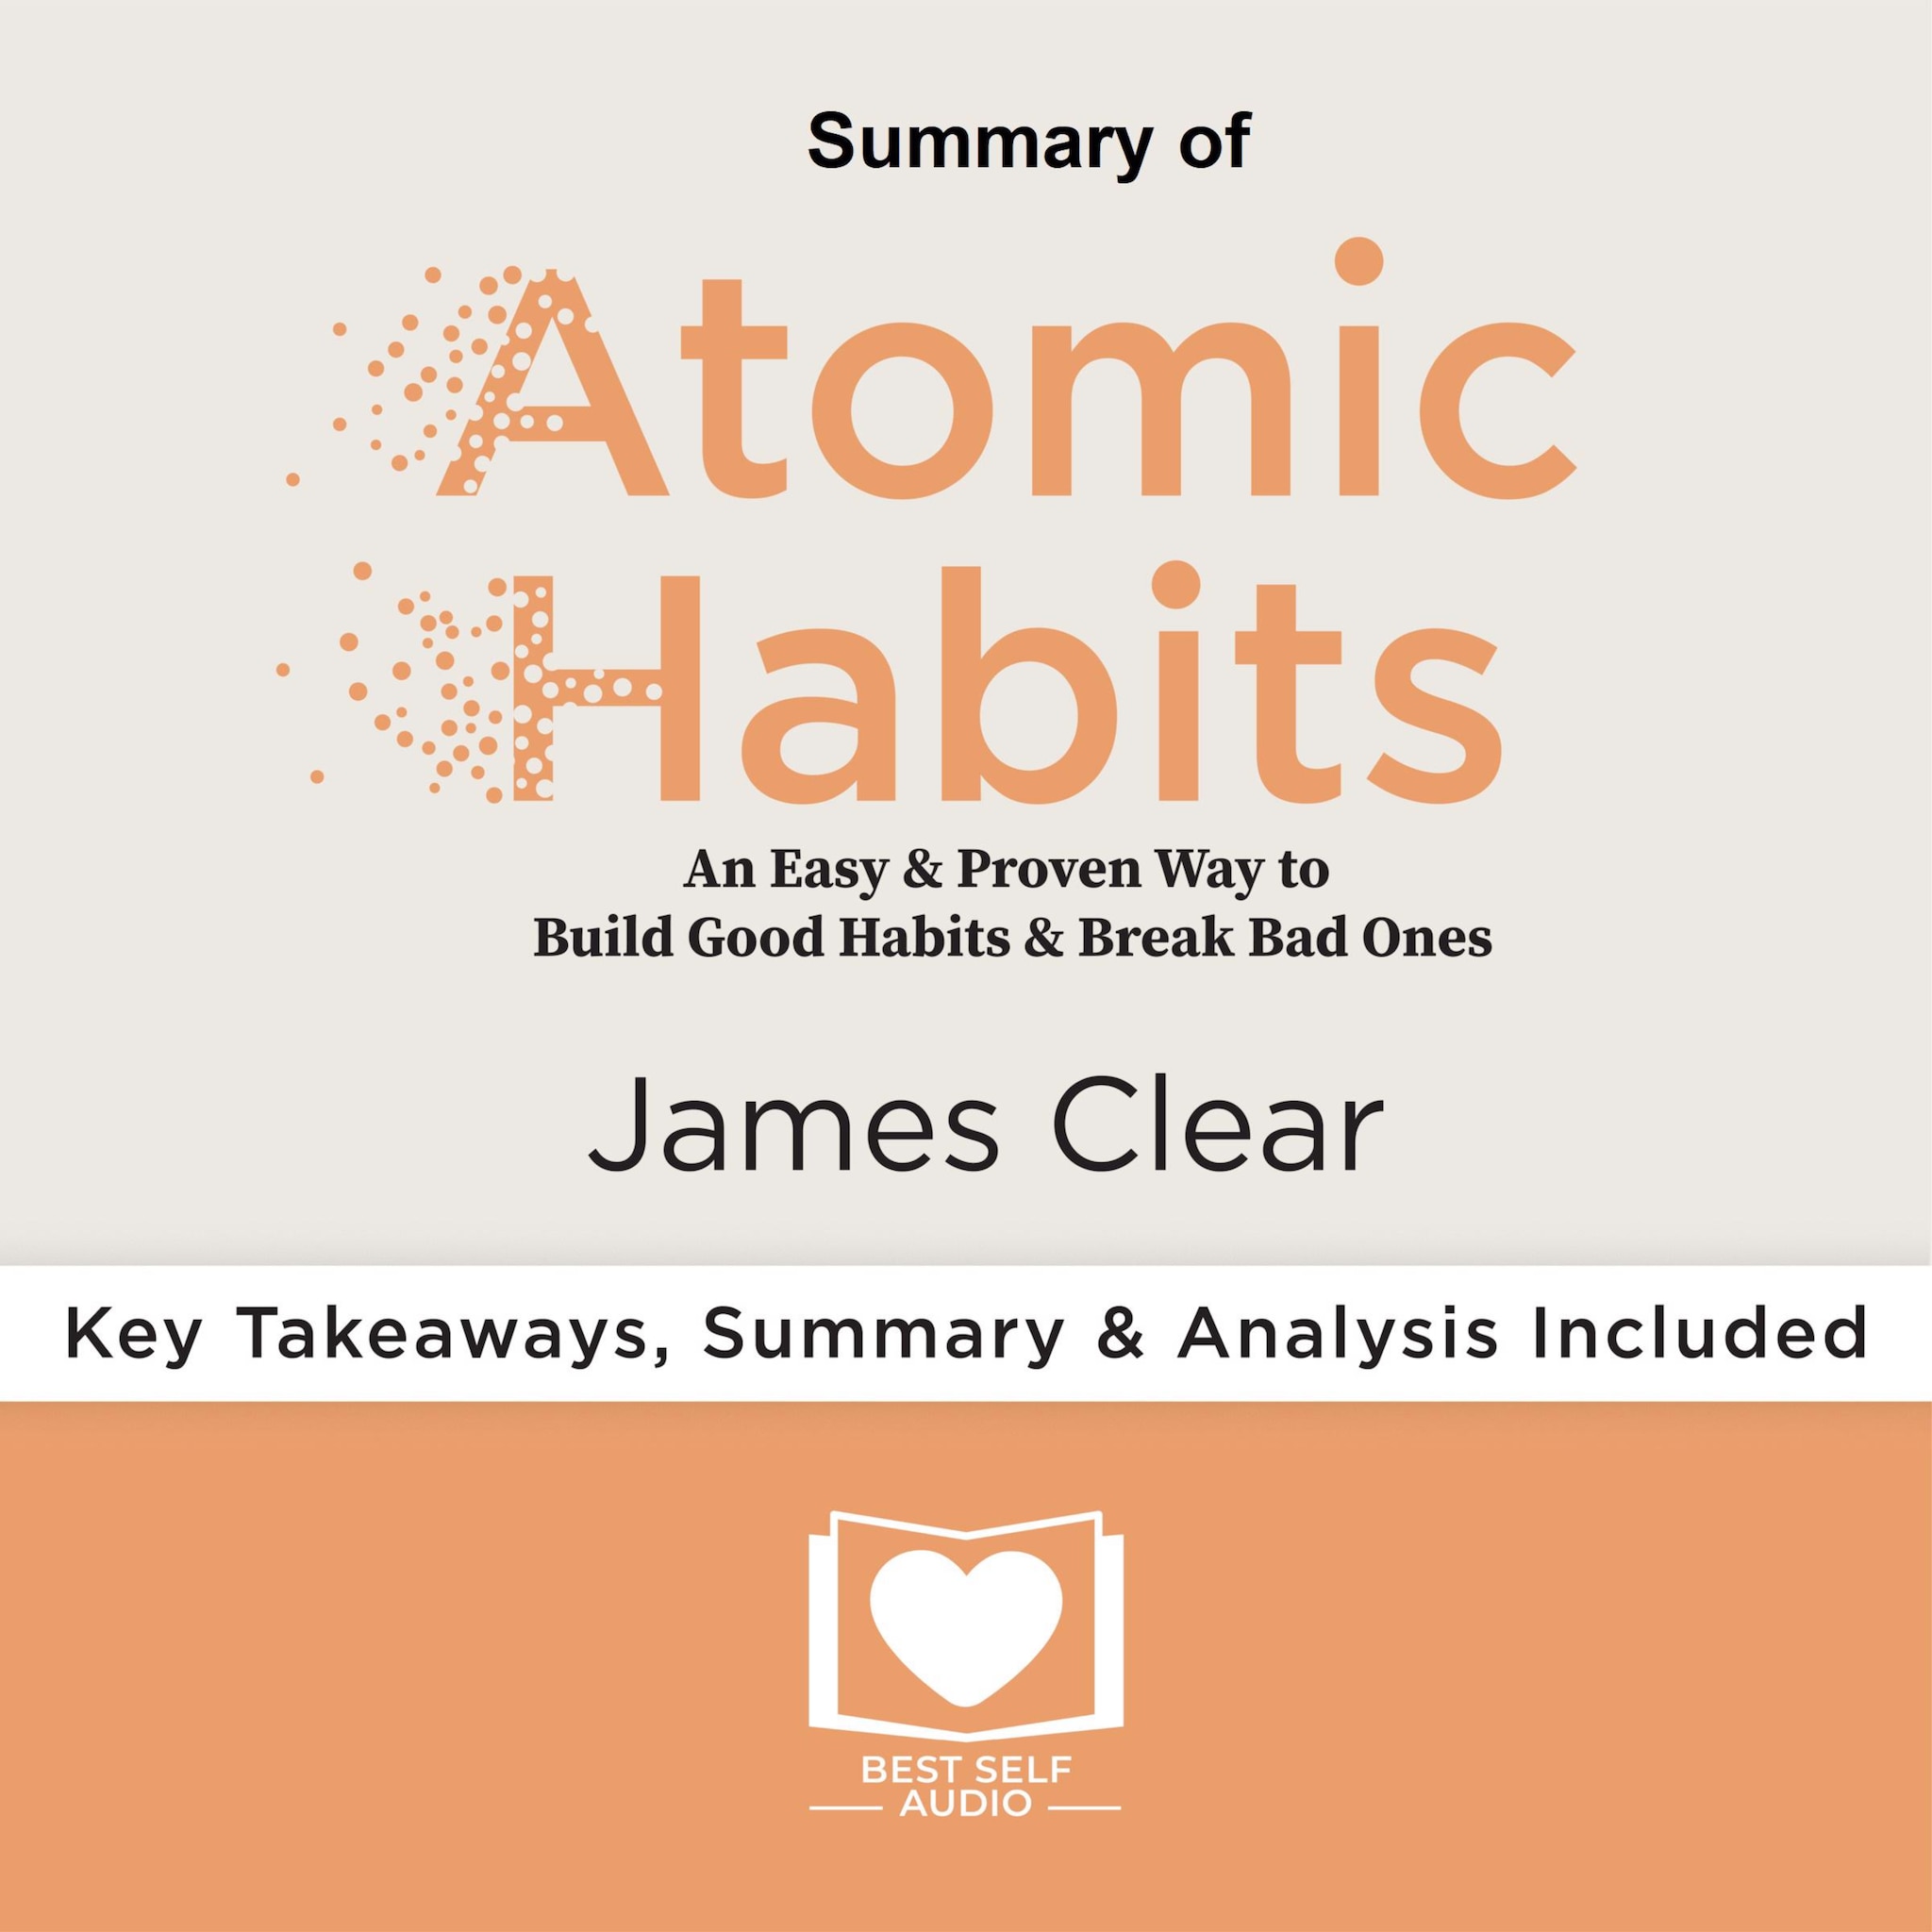 atomic habits by james clear download